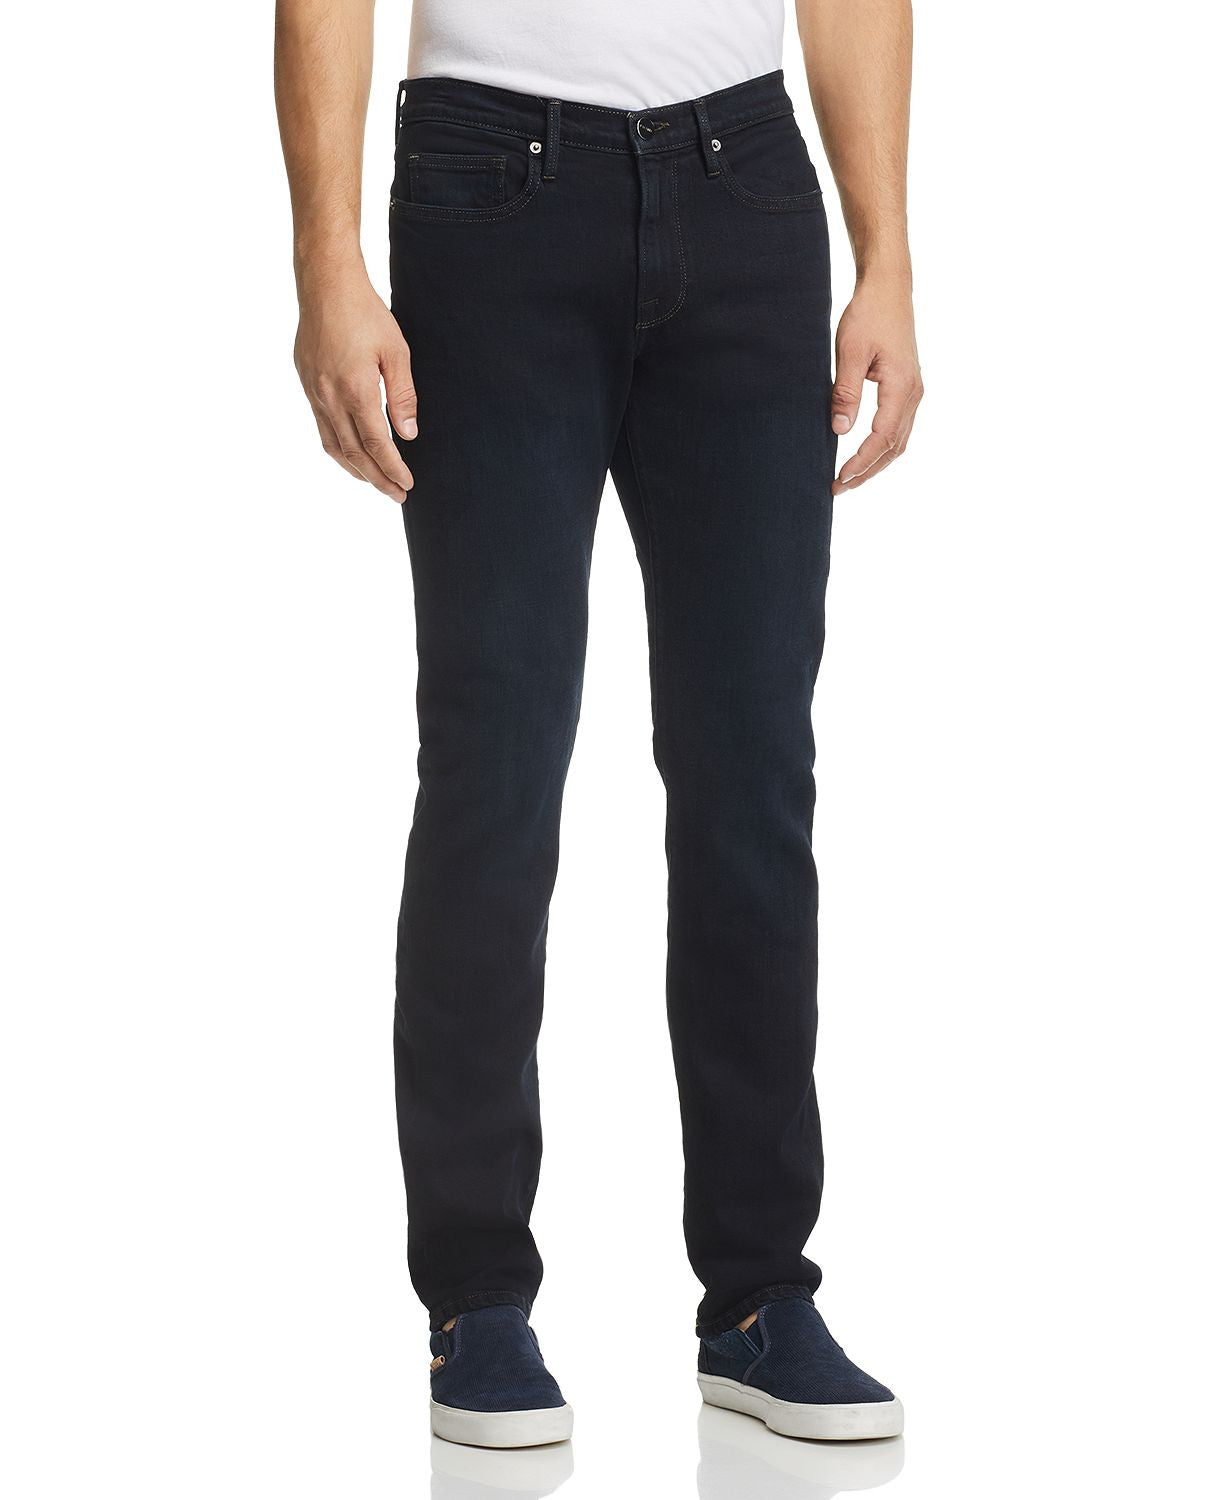 Frame L'homme Slim Fit Jeans In Sequoia Sequoia